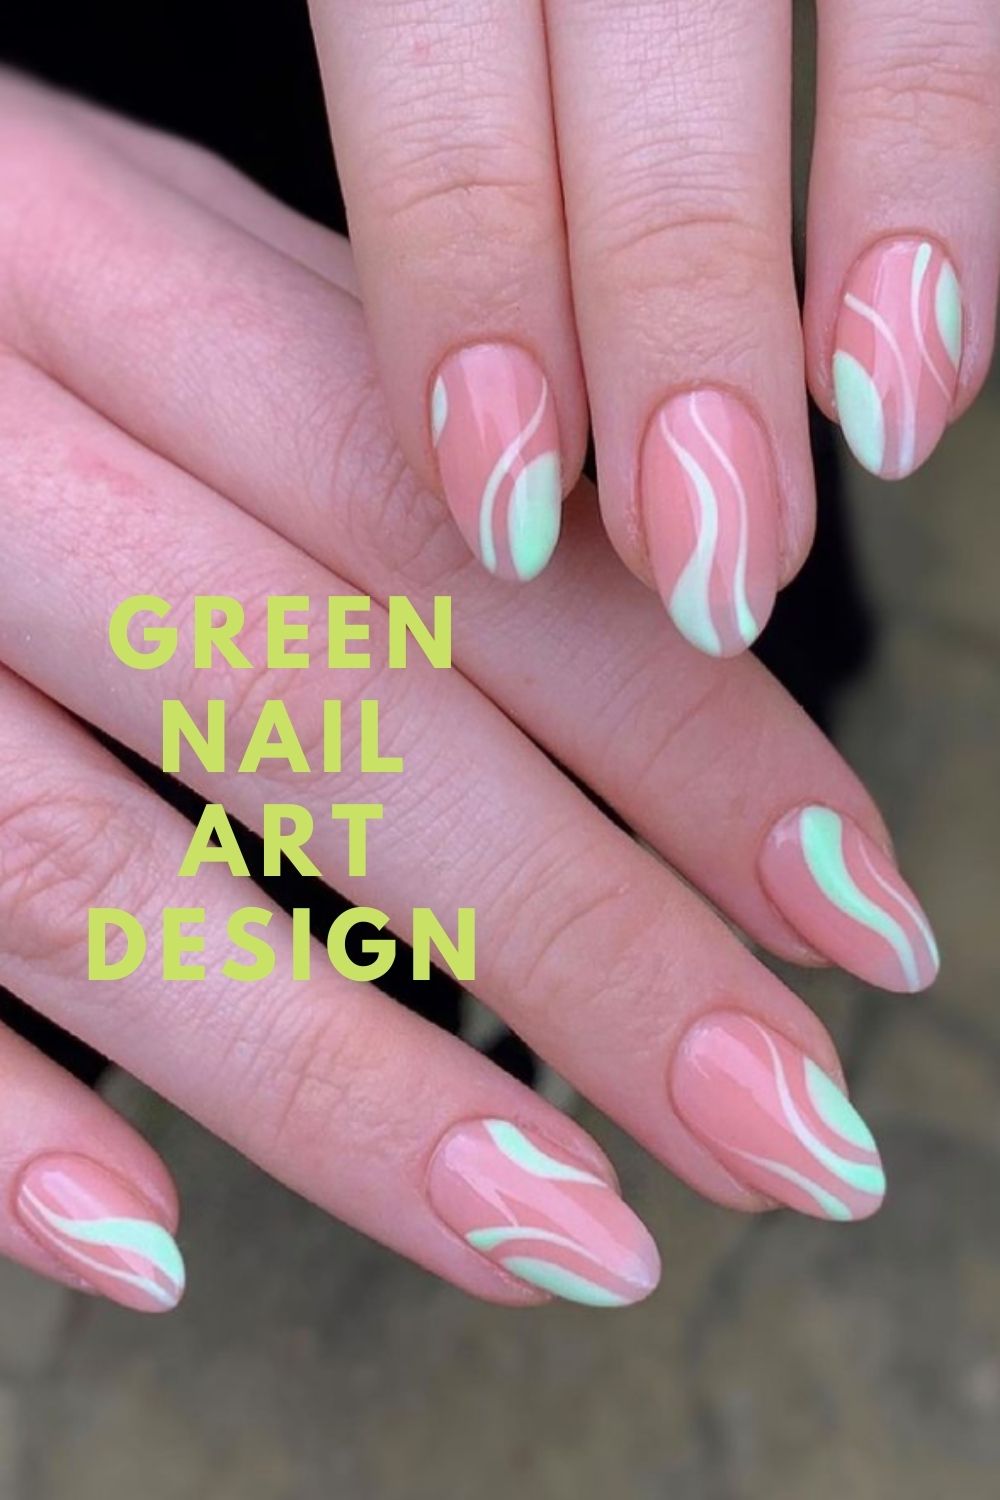 Pink and neon green nails art